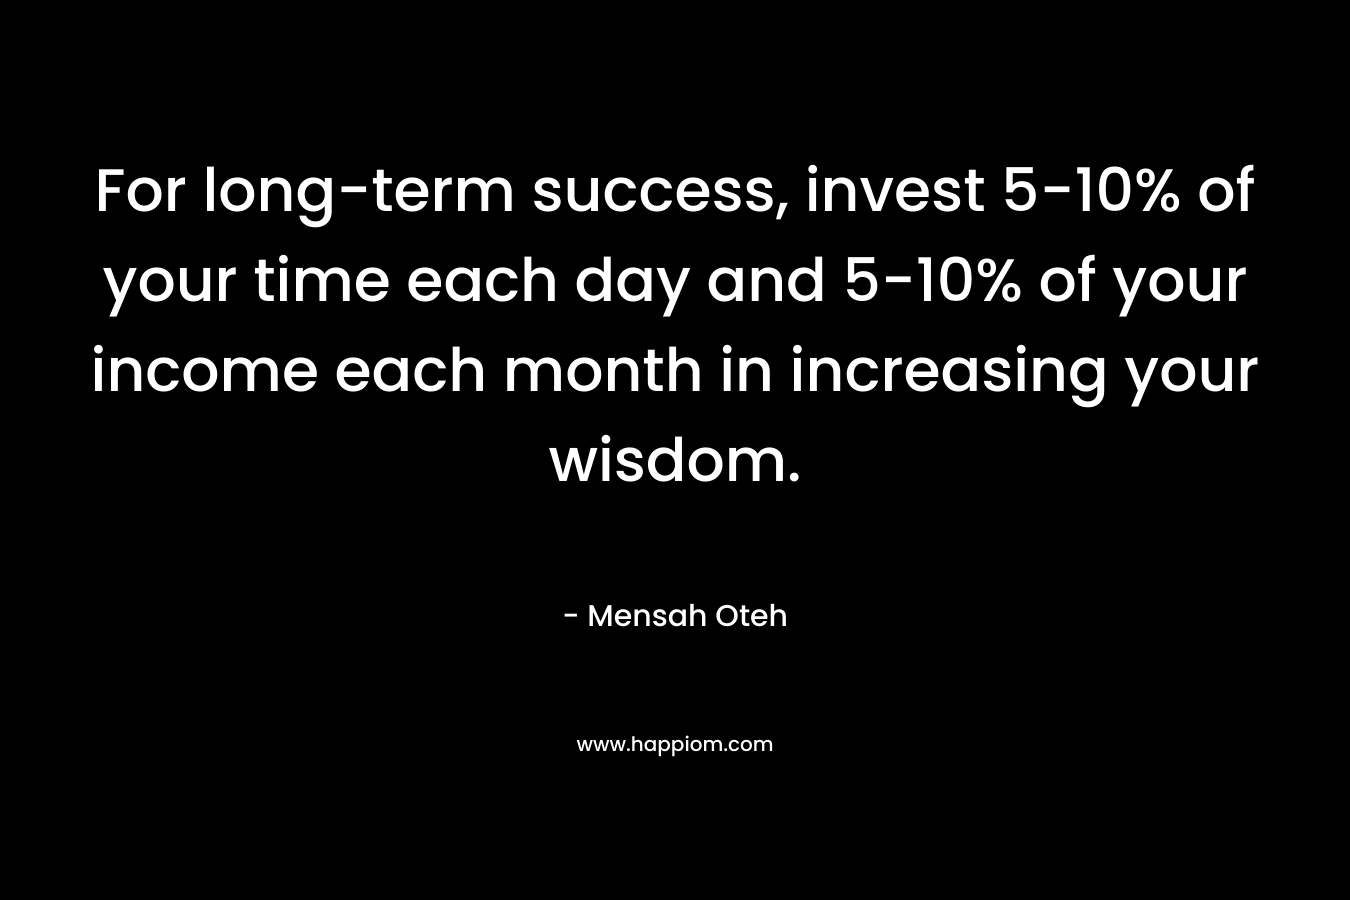 For long-term success, invest 5-10% of your time each day and 5-10% of your income each month in increasing your wisdom. – Mensah Oteh